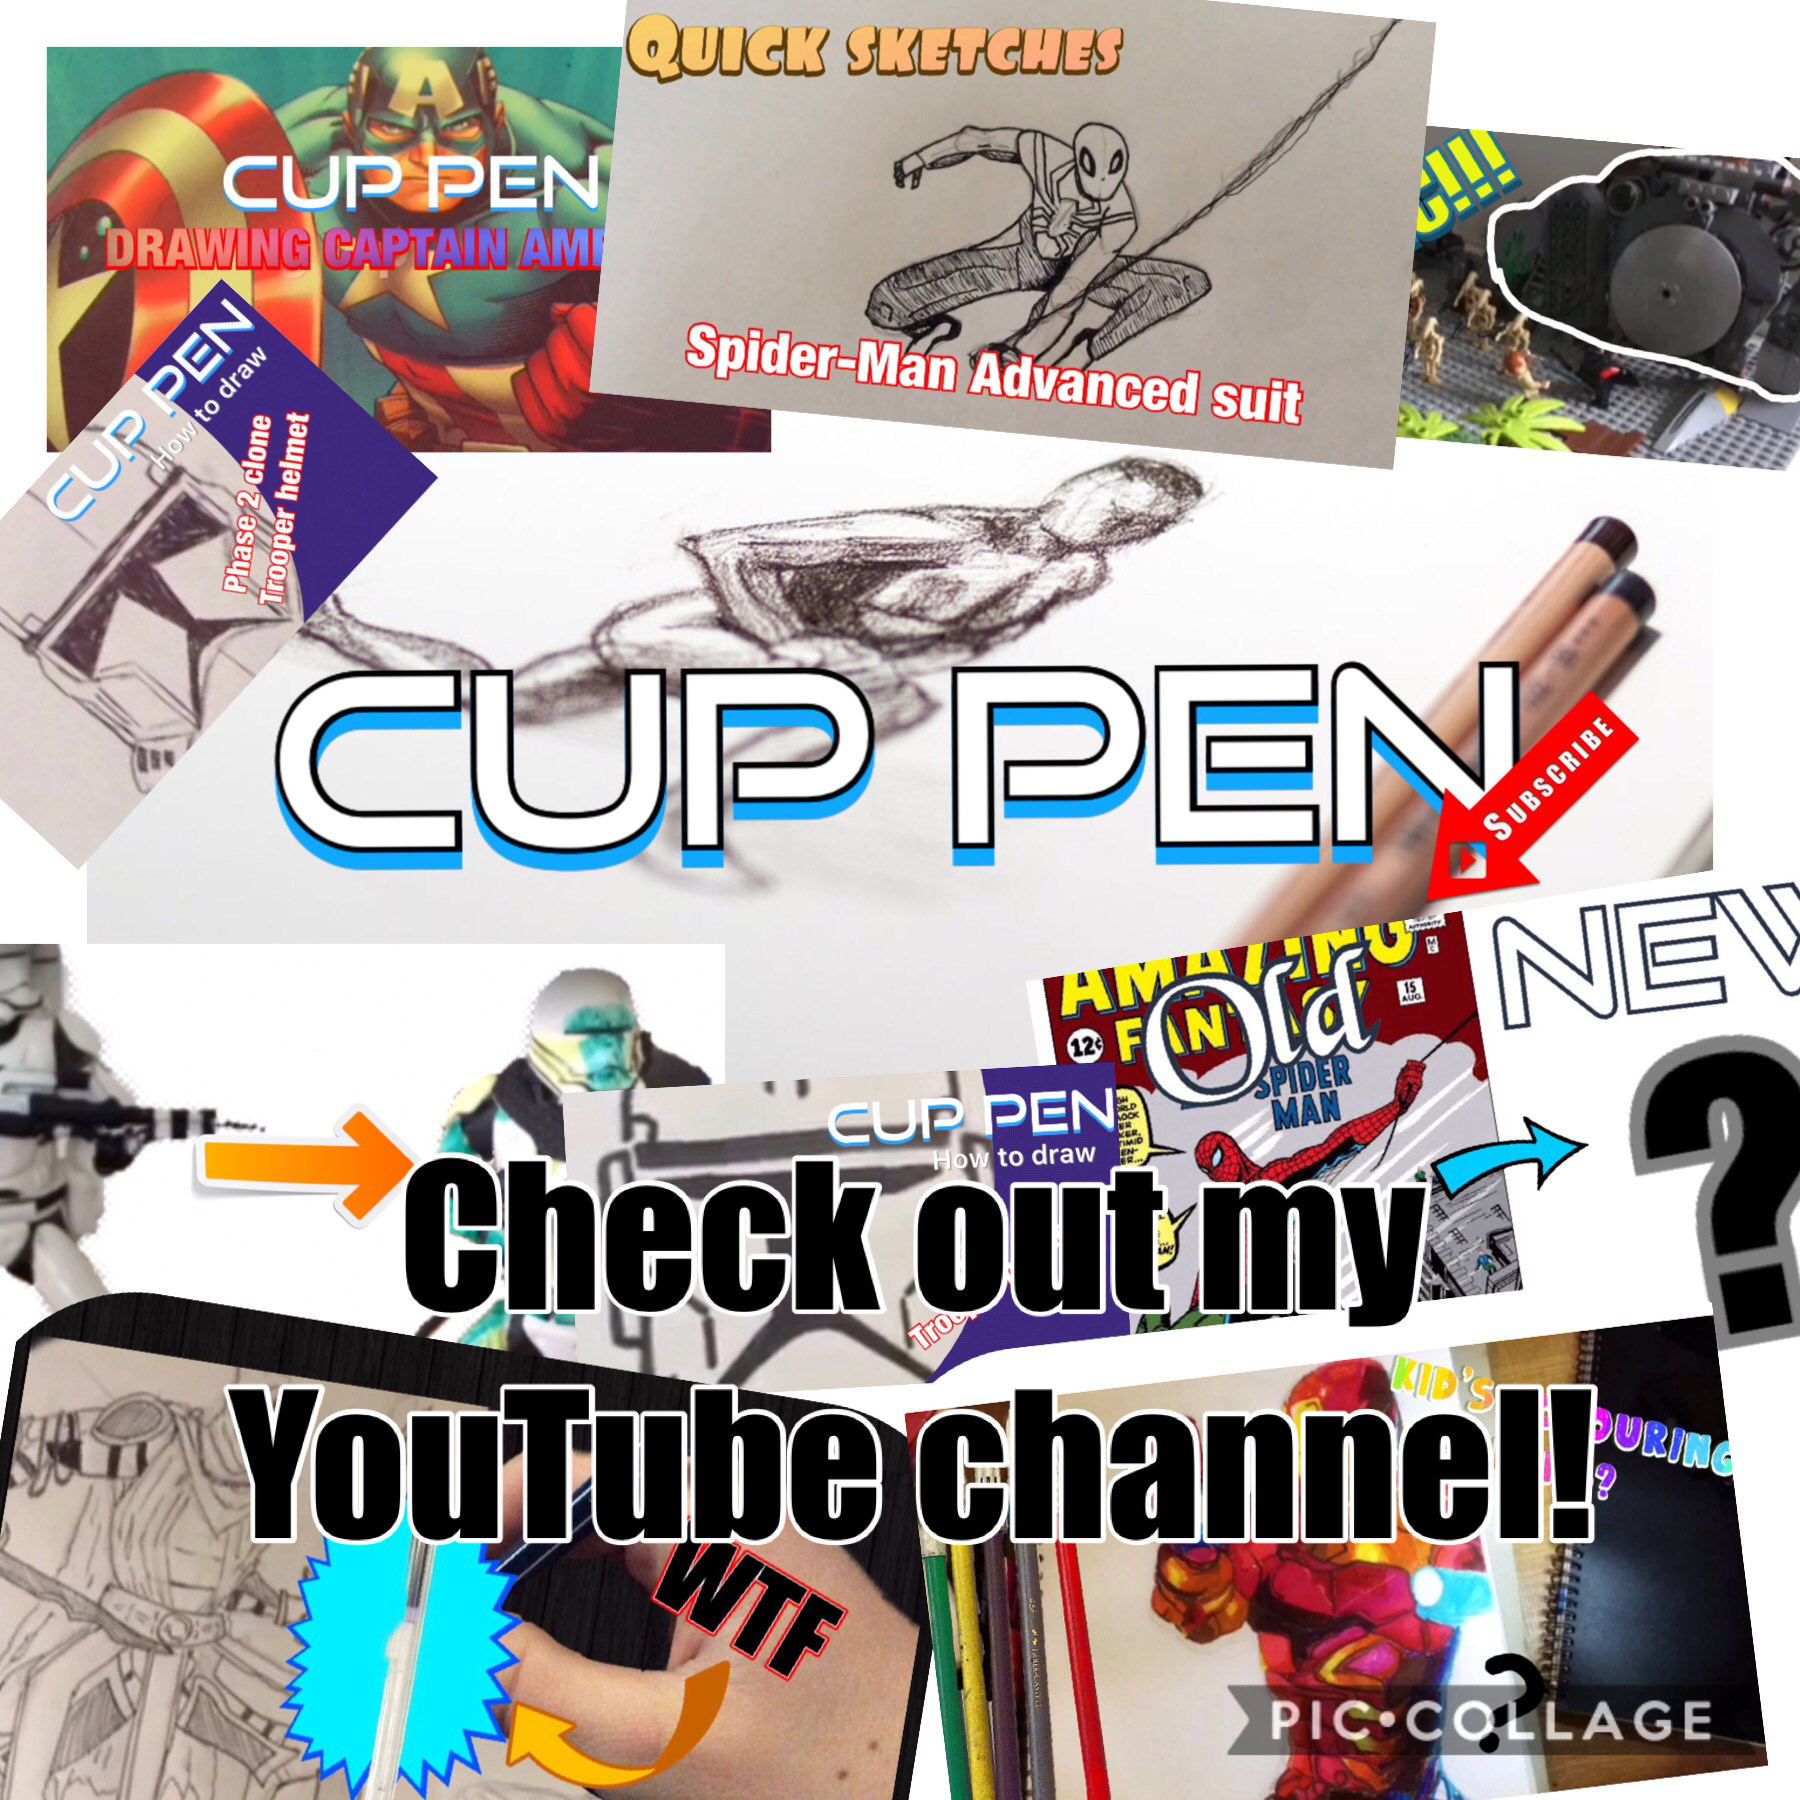 Cup Pen youtube channel